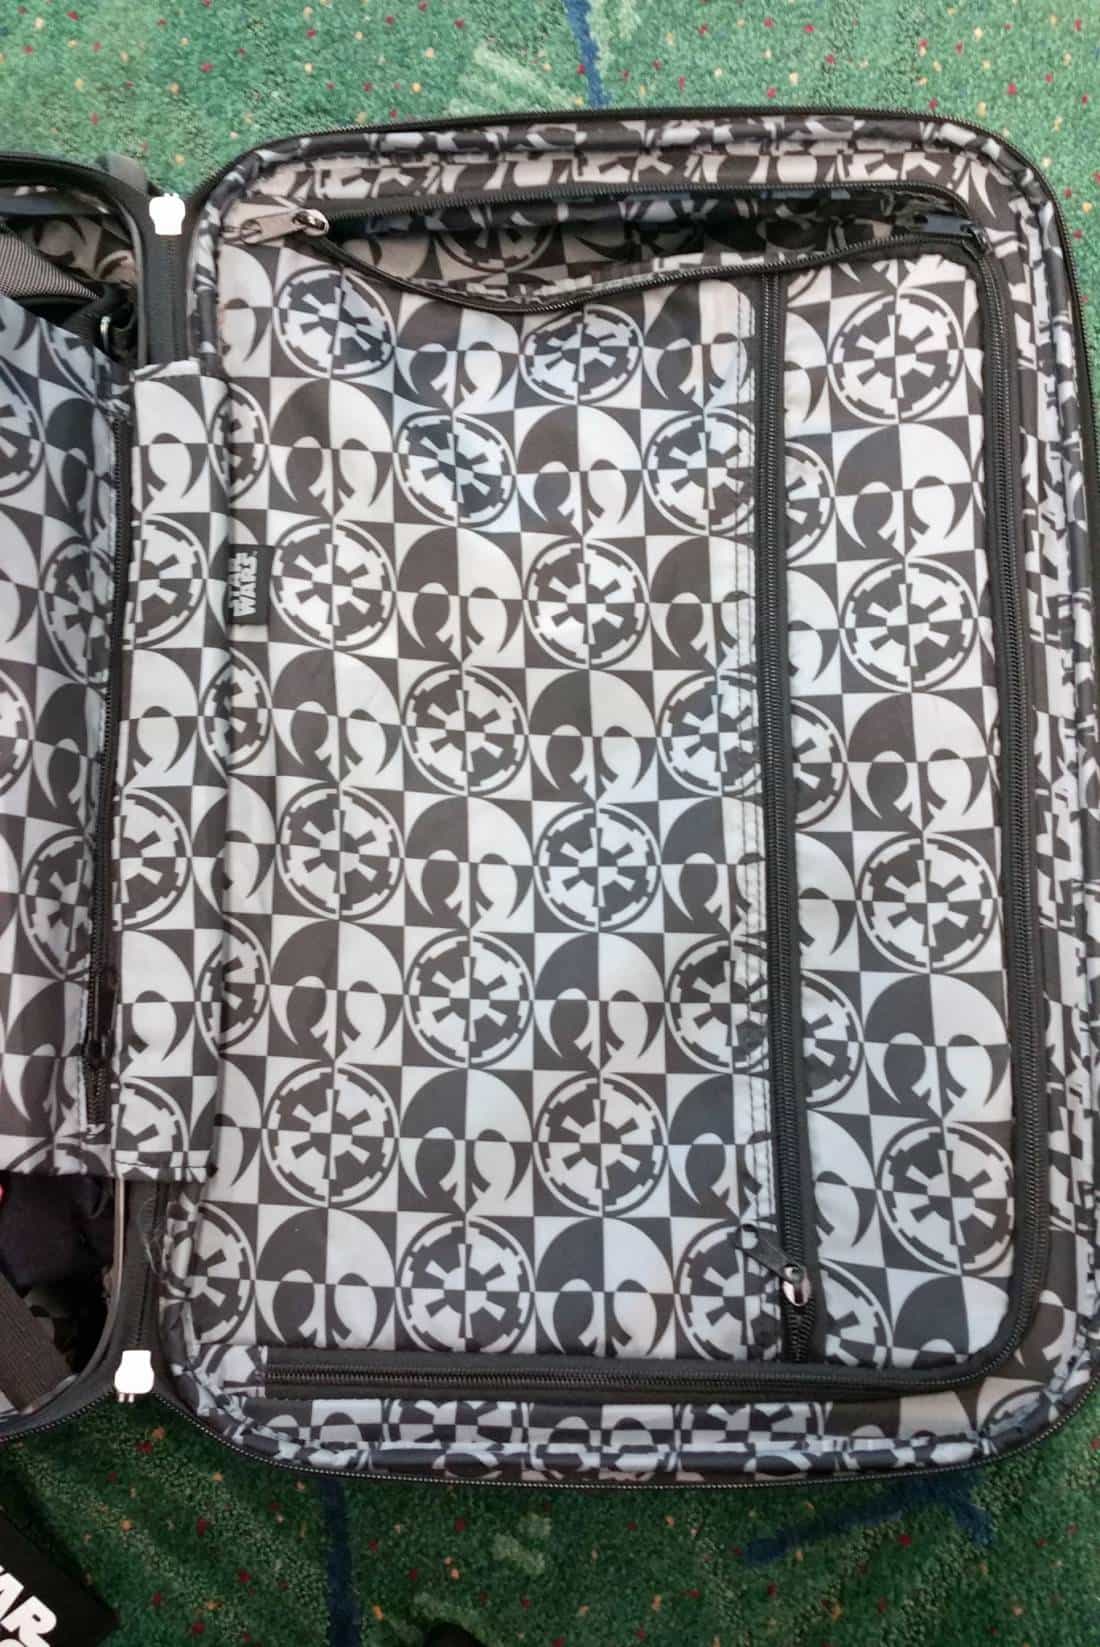 The Force Is Strong With My New American Tourister Star Wars Luggage..